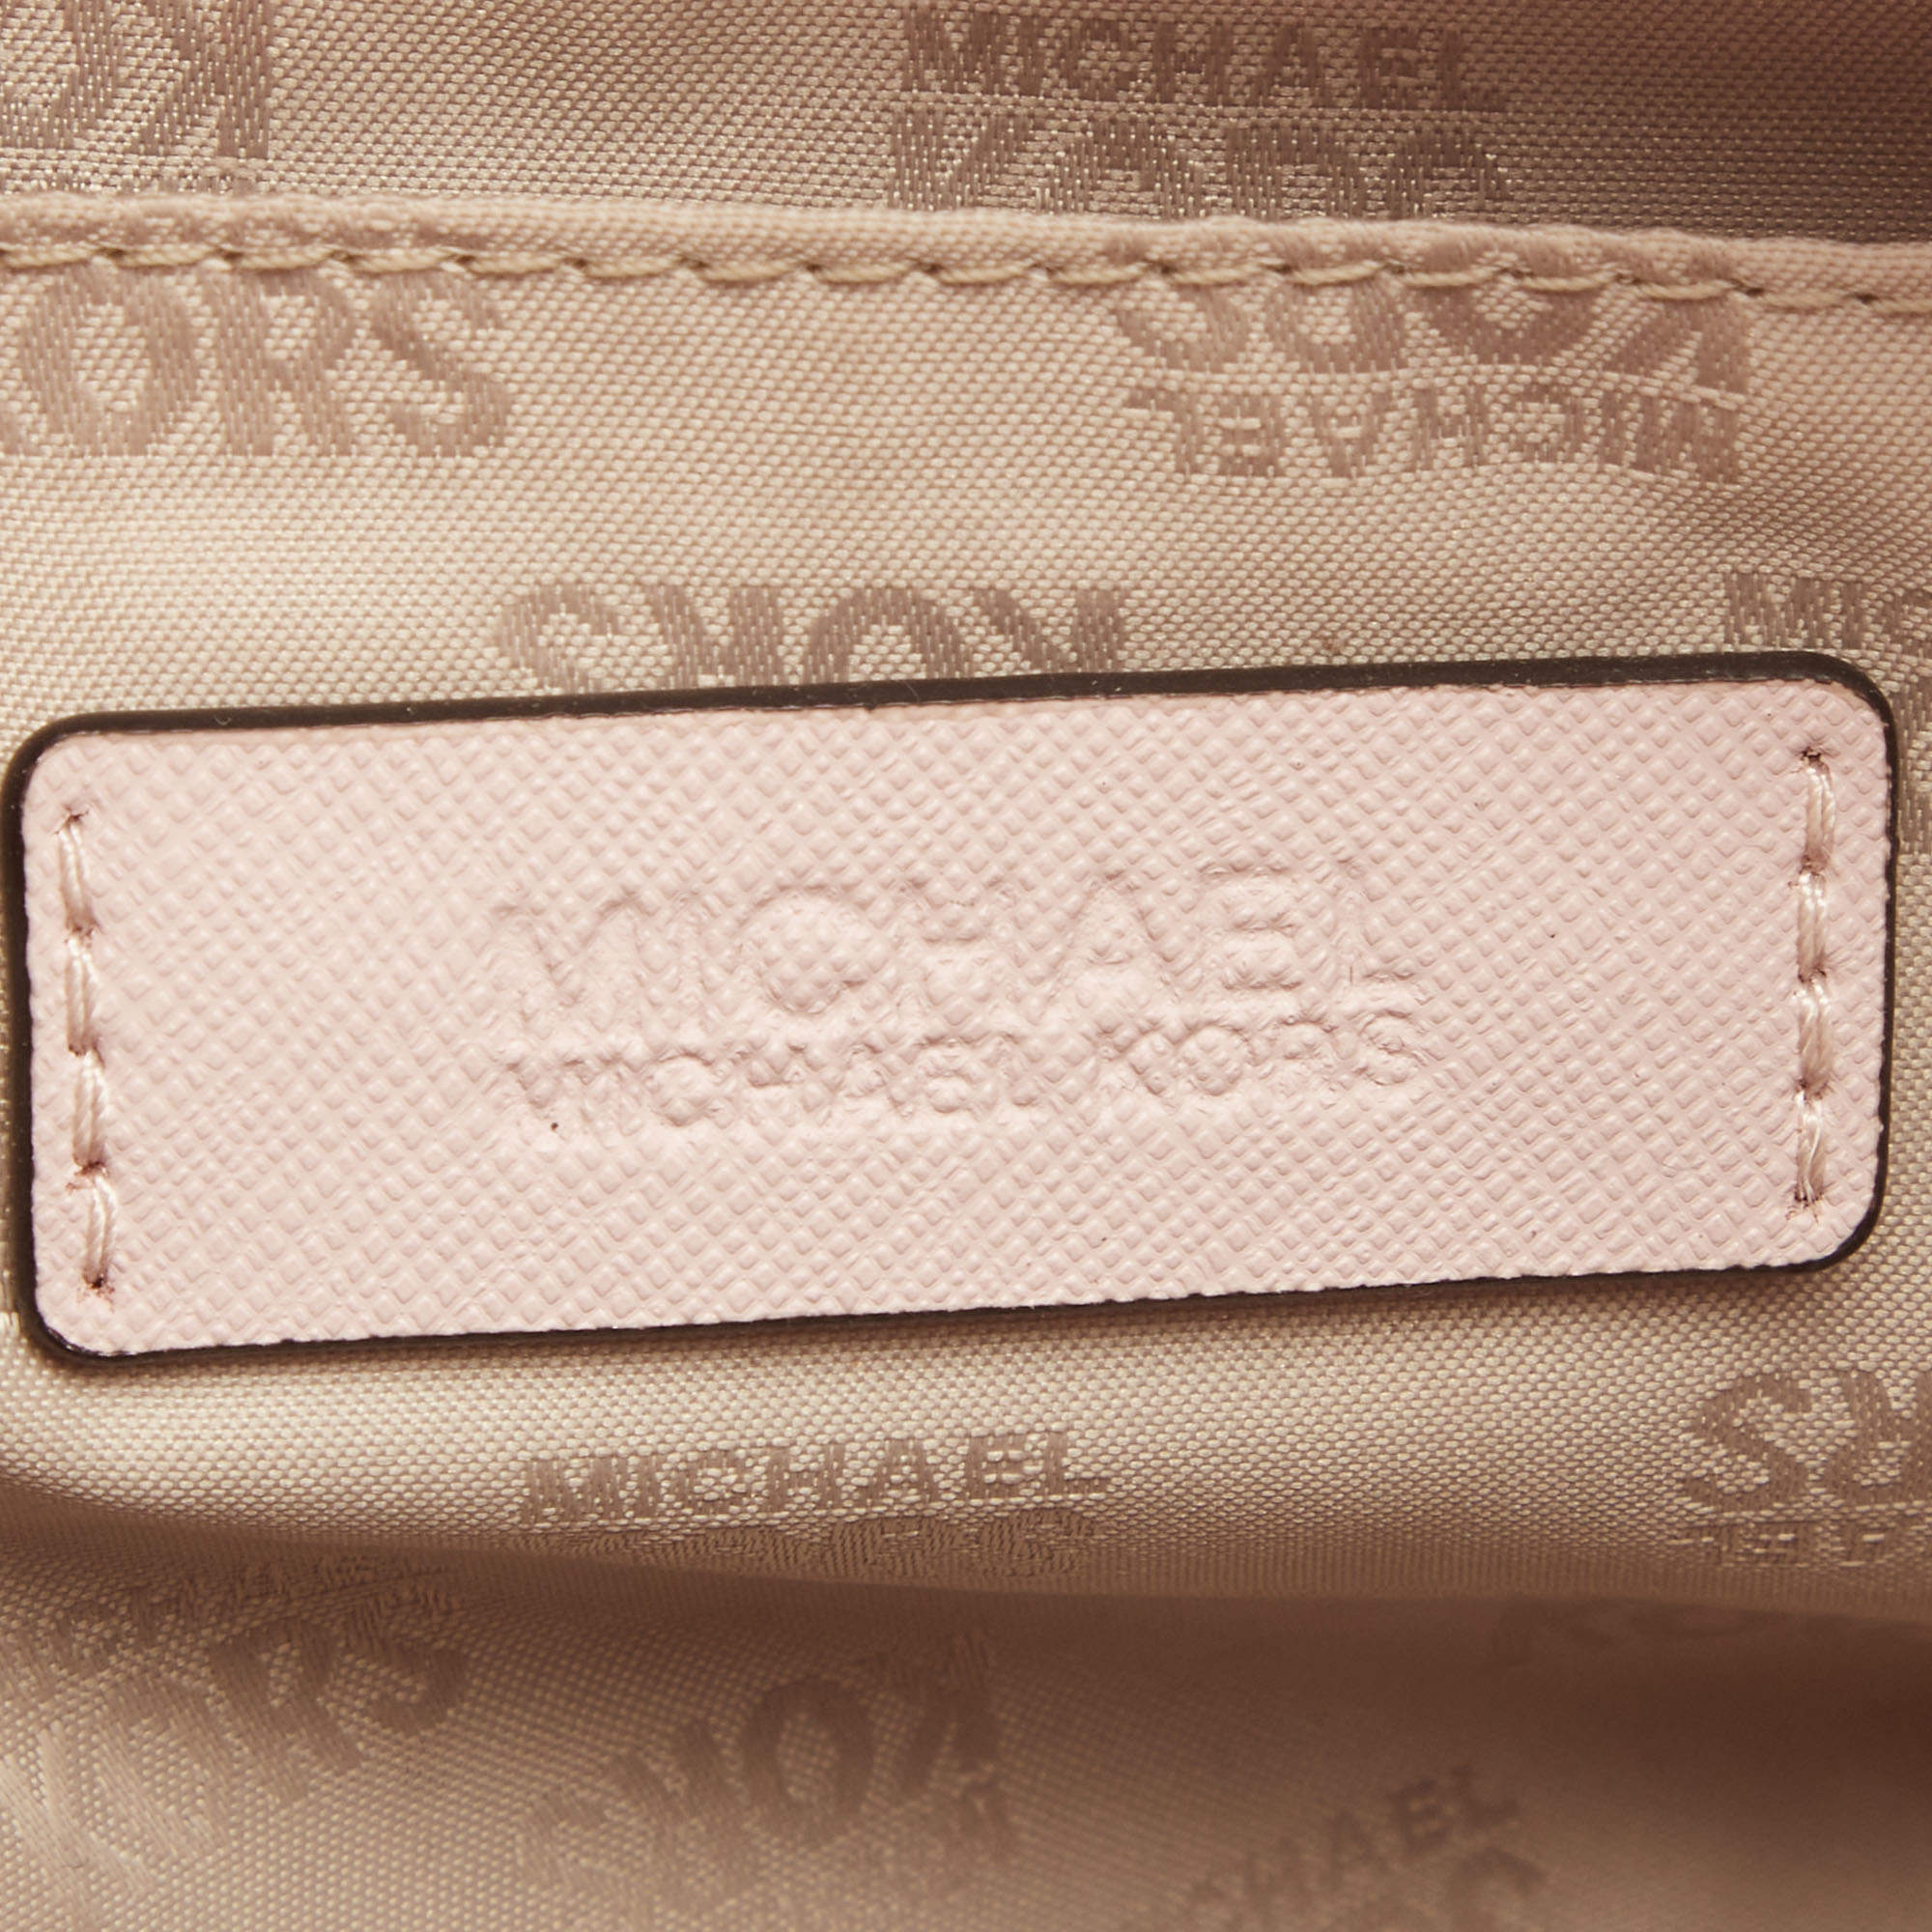 Michael Kors - Authenticated Jet Set Travel Bag - Leather Pink Plain for Women, Never Worn, with Tag